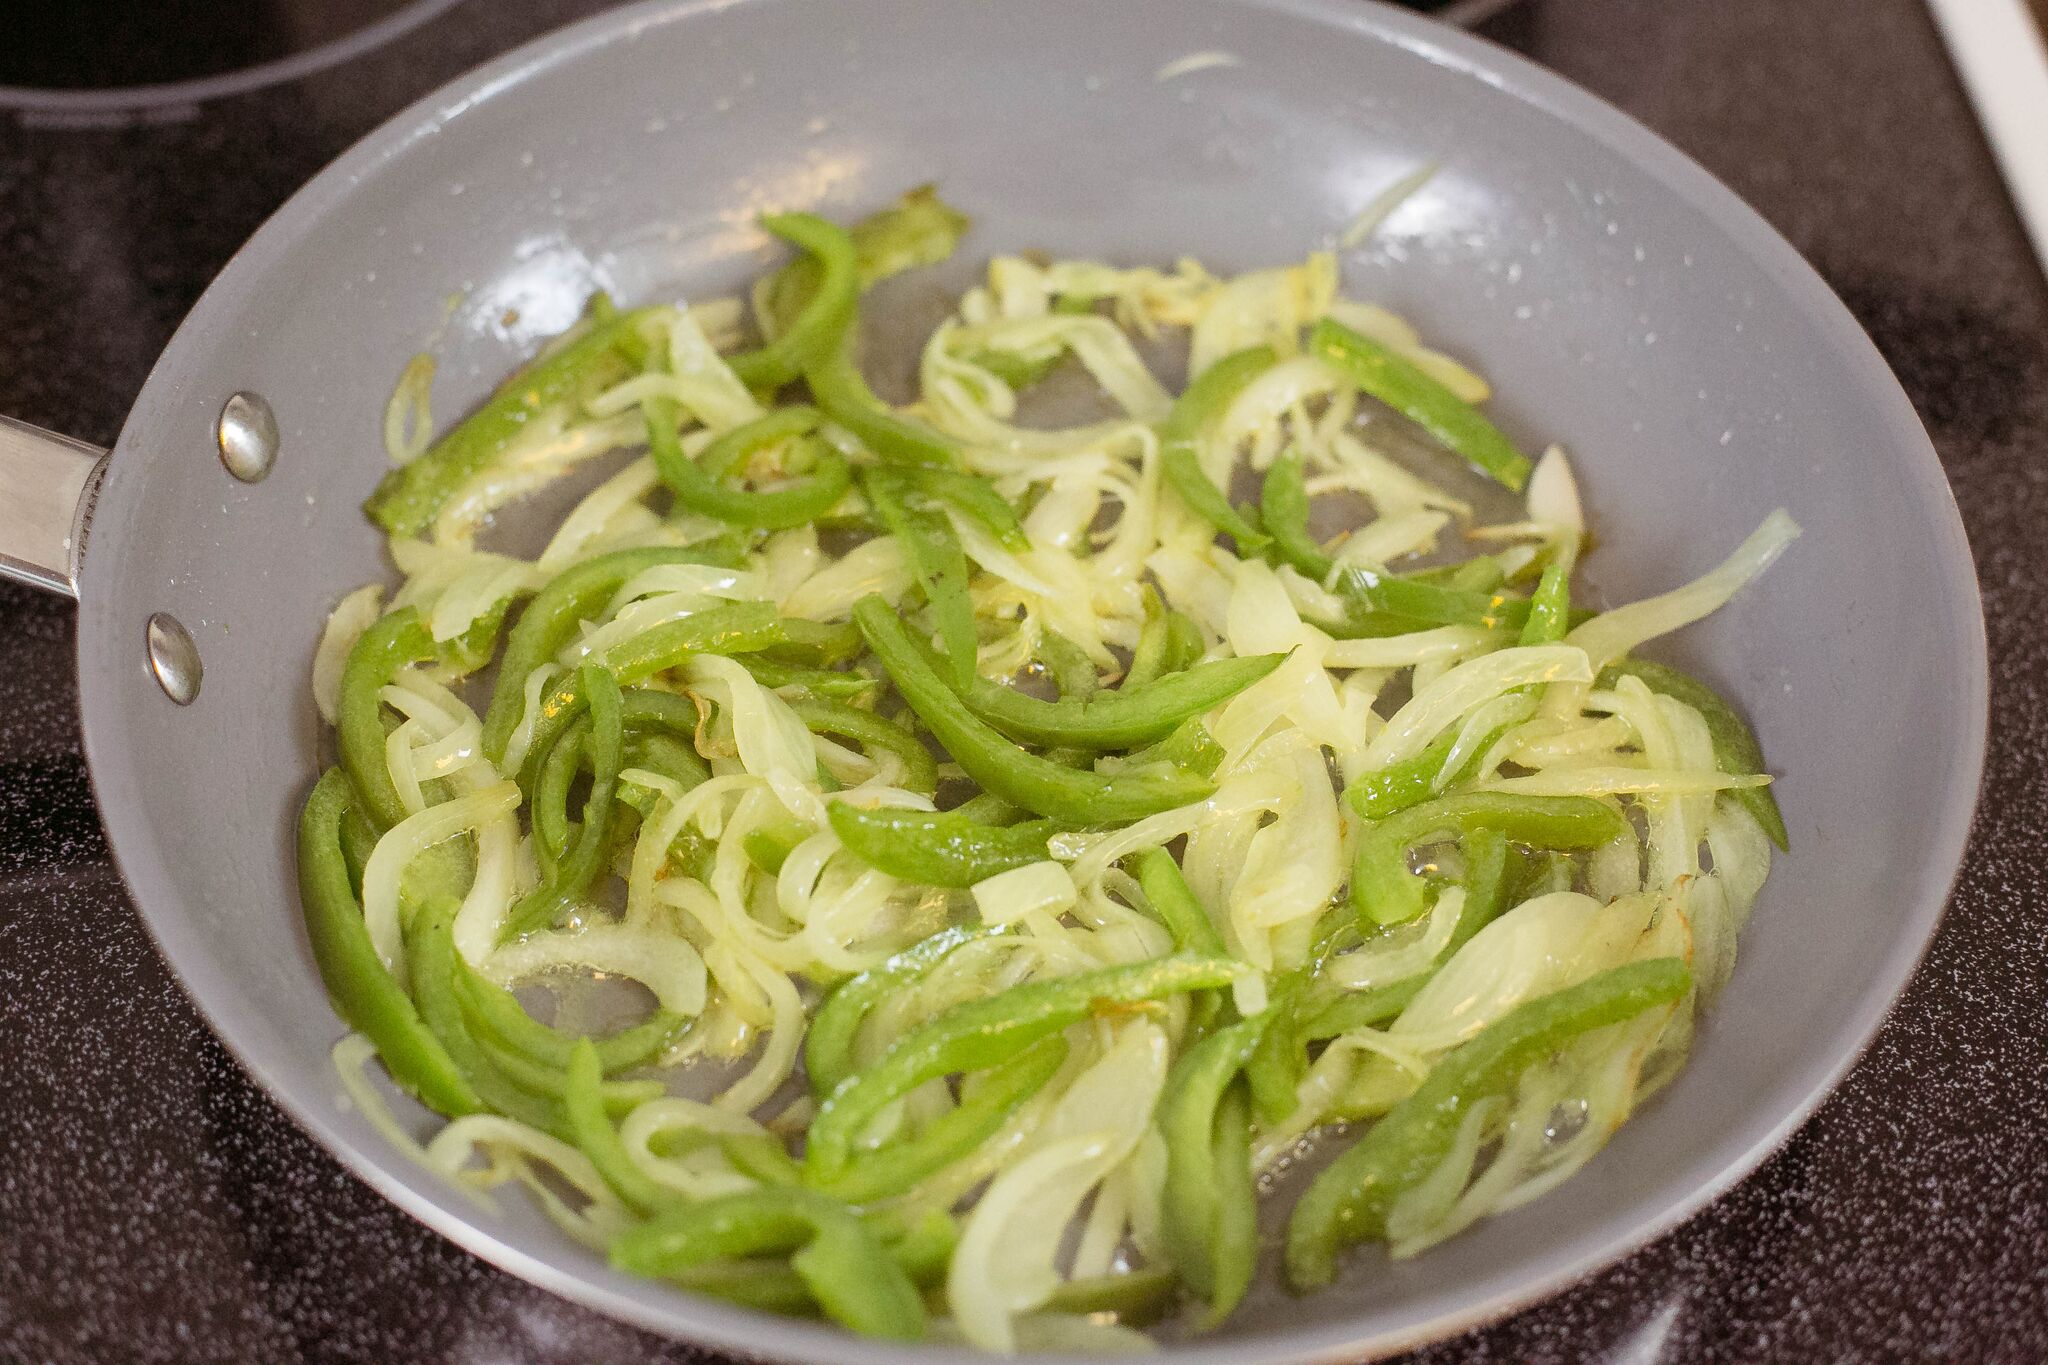 Melt butter in a large pan and saute peppers and onions until soft. 